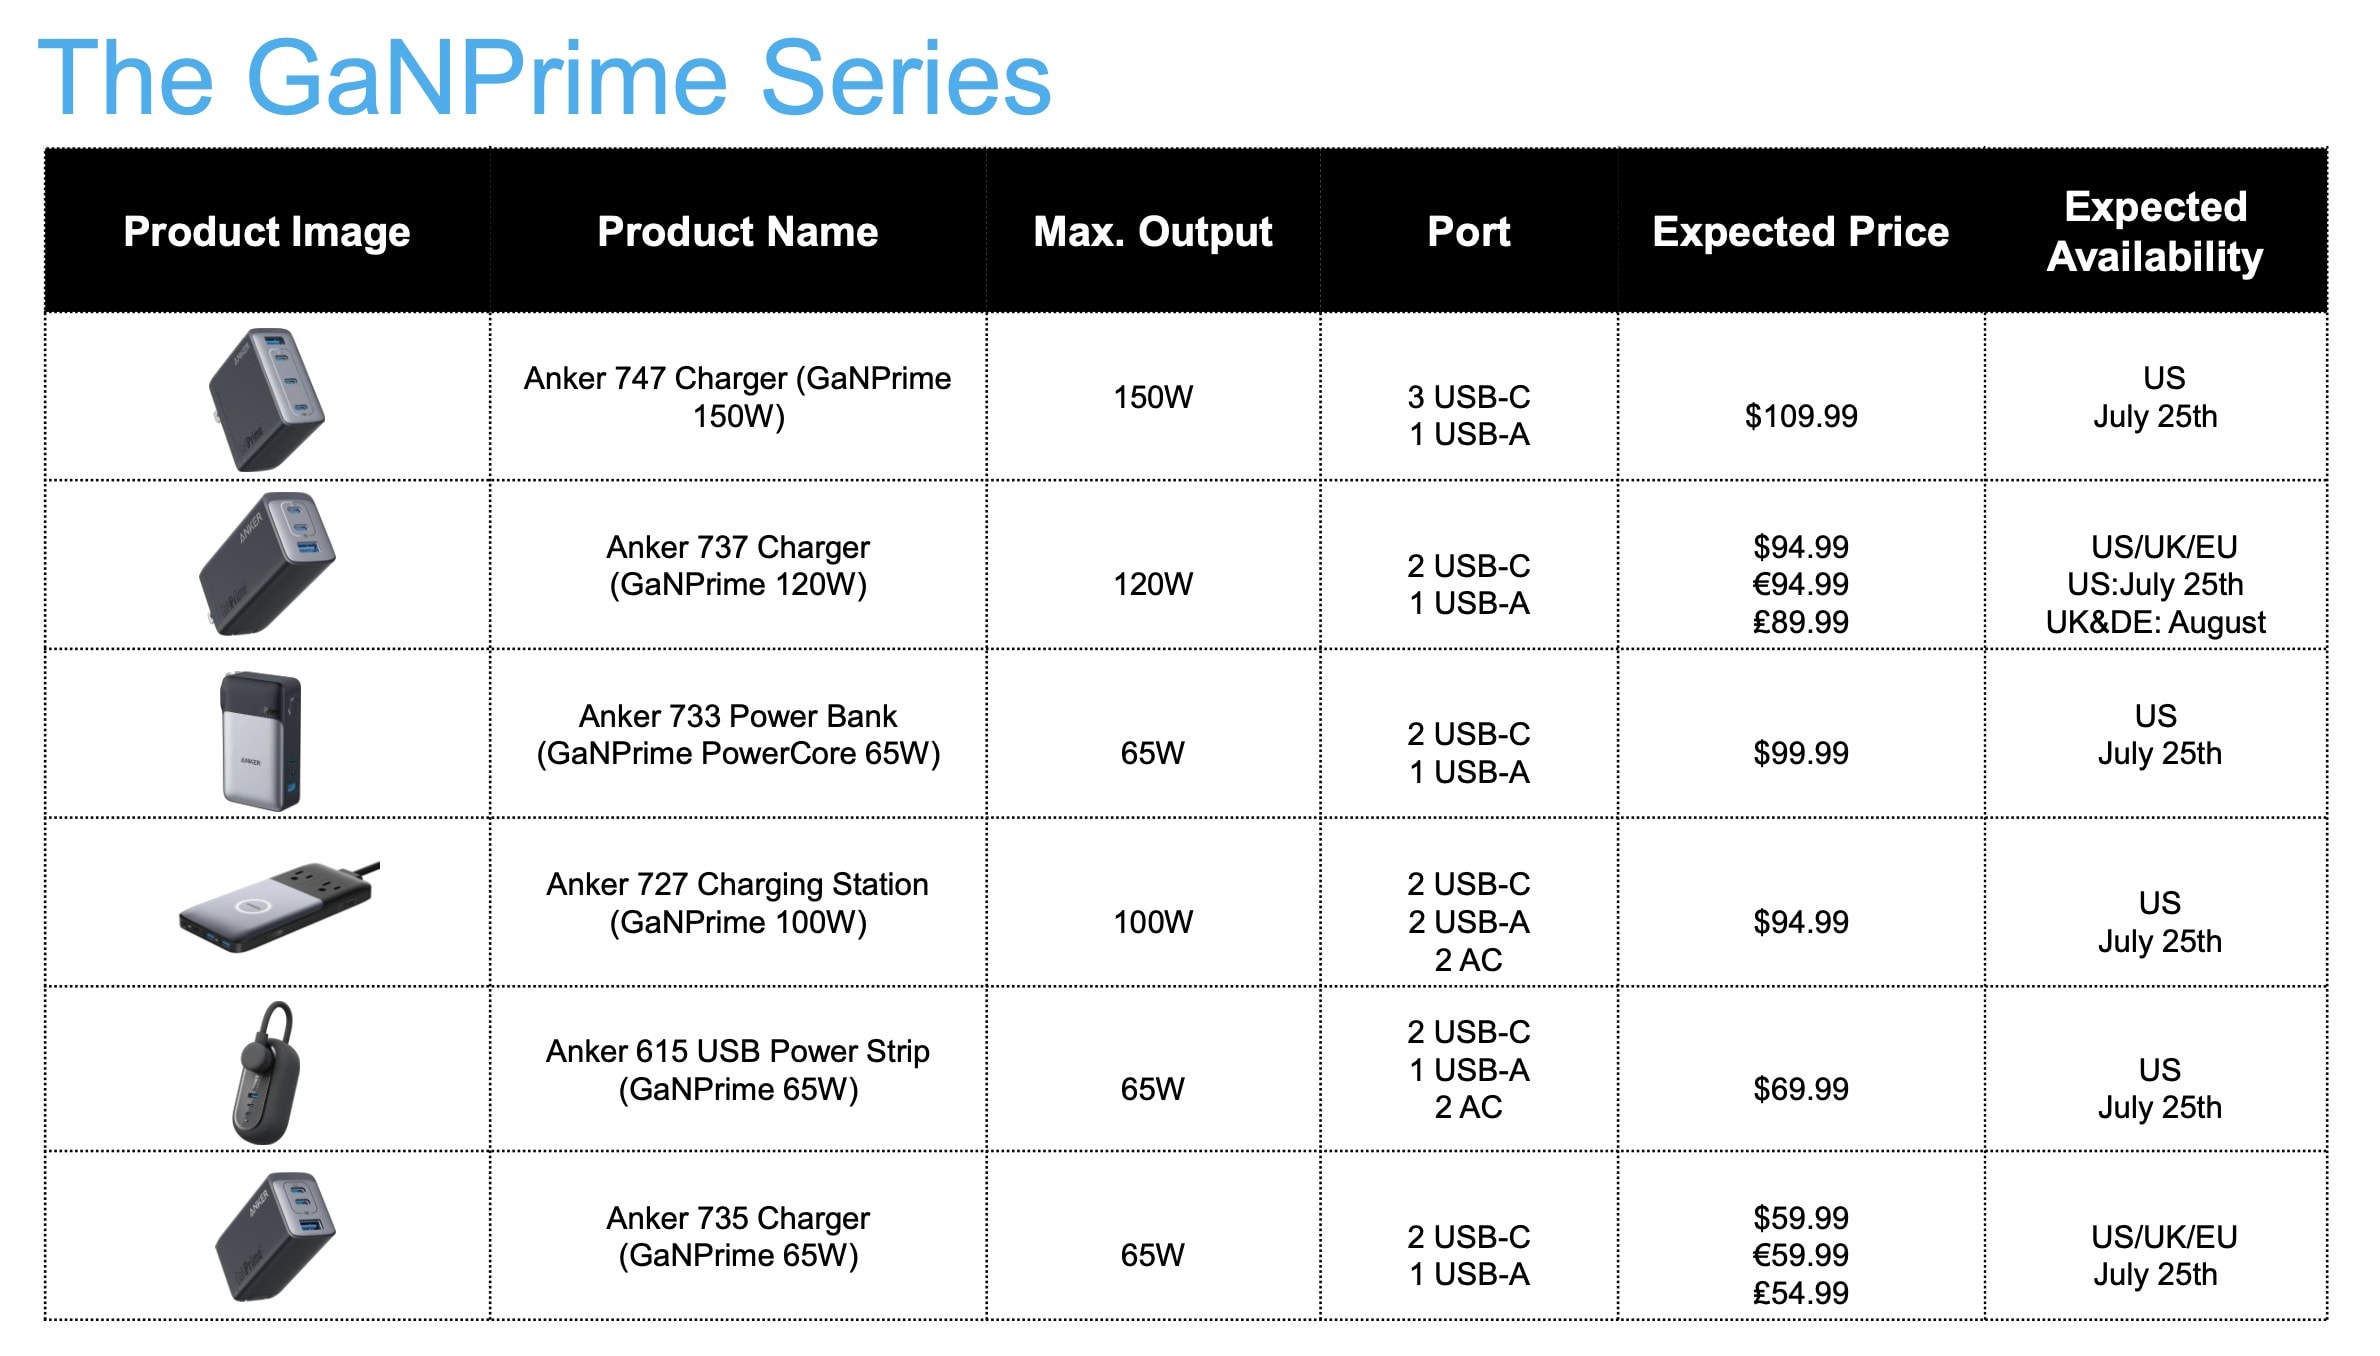 The GaNPrime series includes six chargers with different styles and outputs.